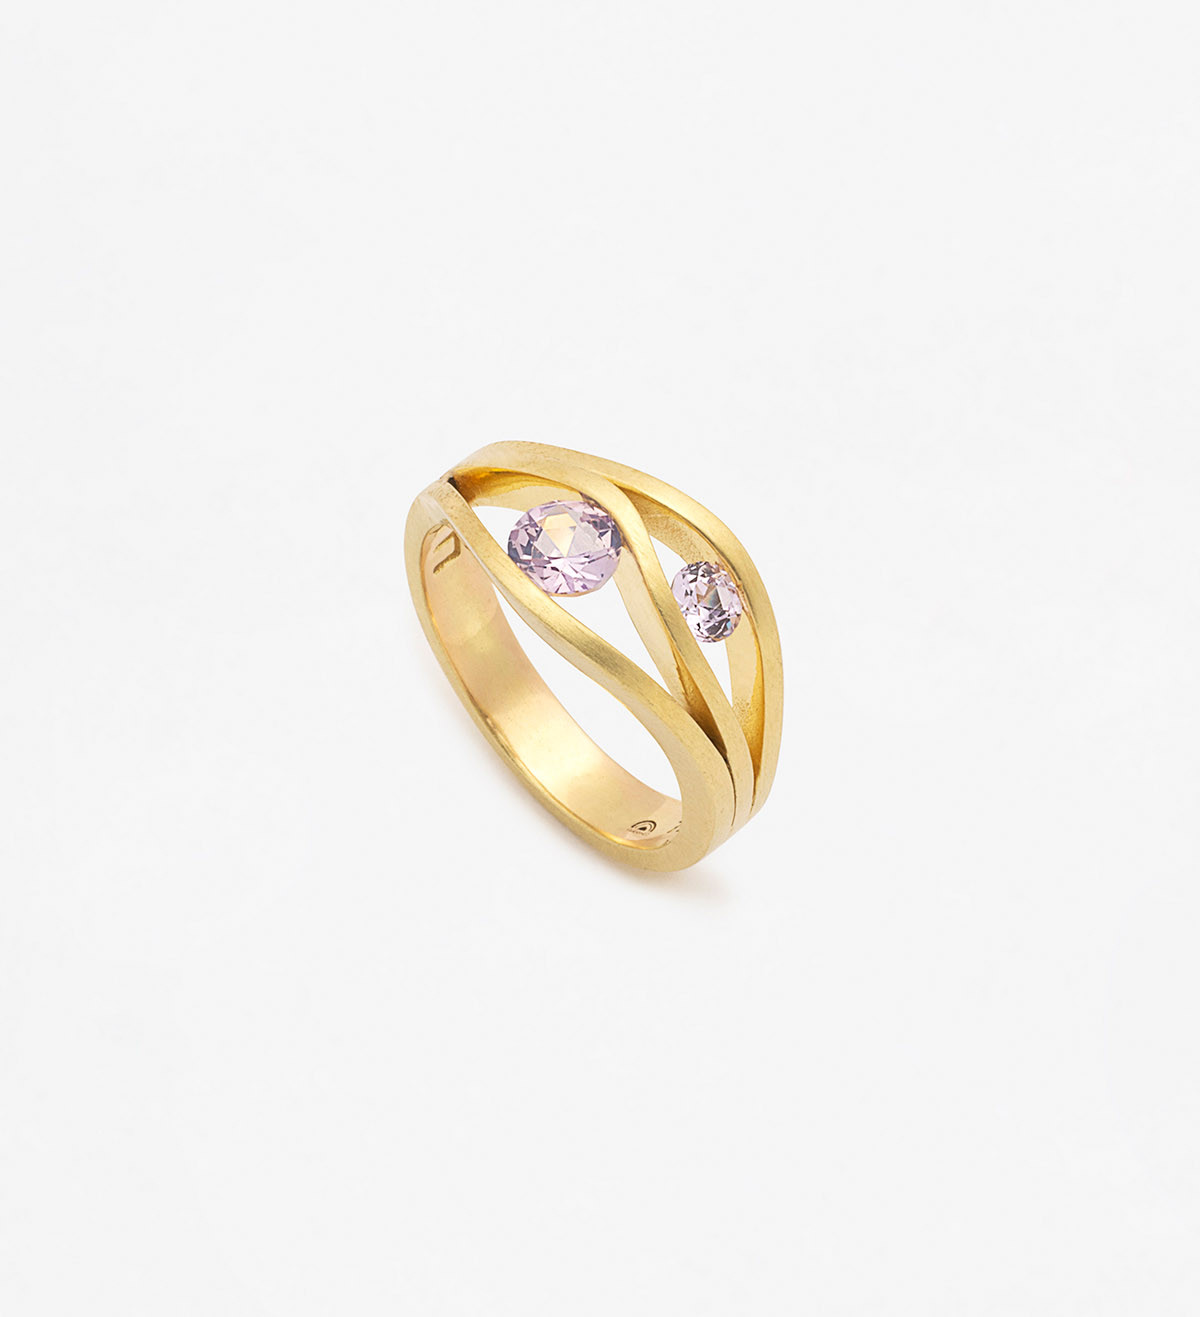 18k gold ring with rose sapphires Wennick-Lefèvre 0.61ct